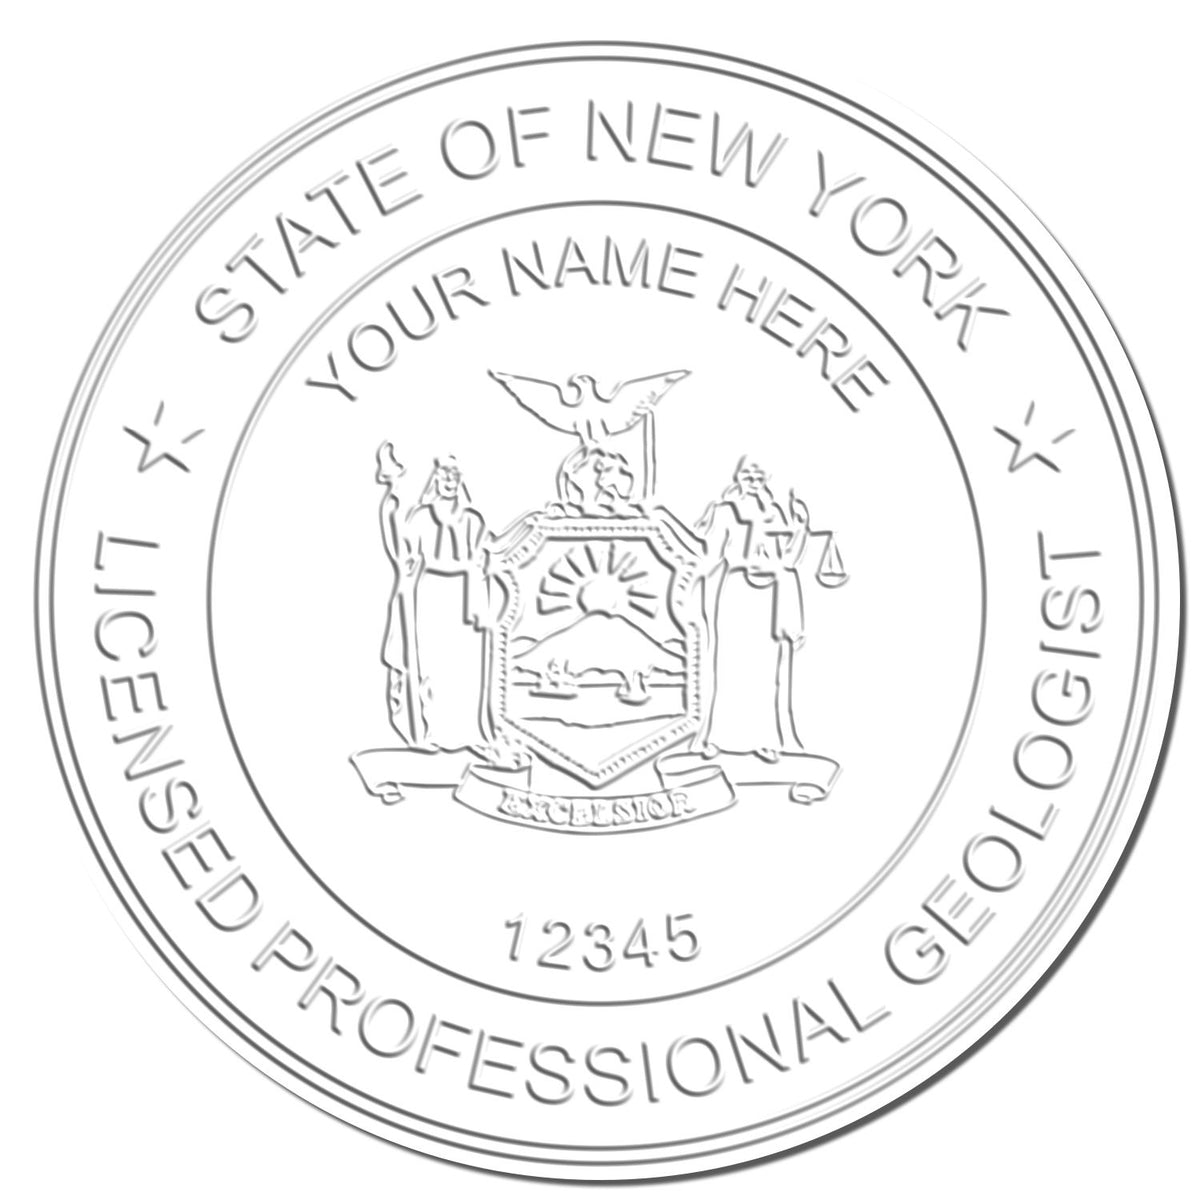 A stamped imprint of the Gift New York Geologist Seal in this stylish lifestyle photo, setting the tone for a unique and personalized product.